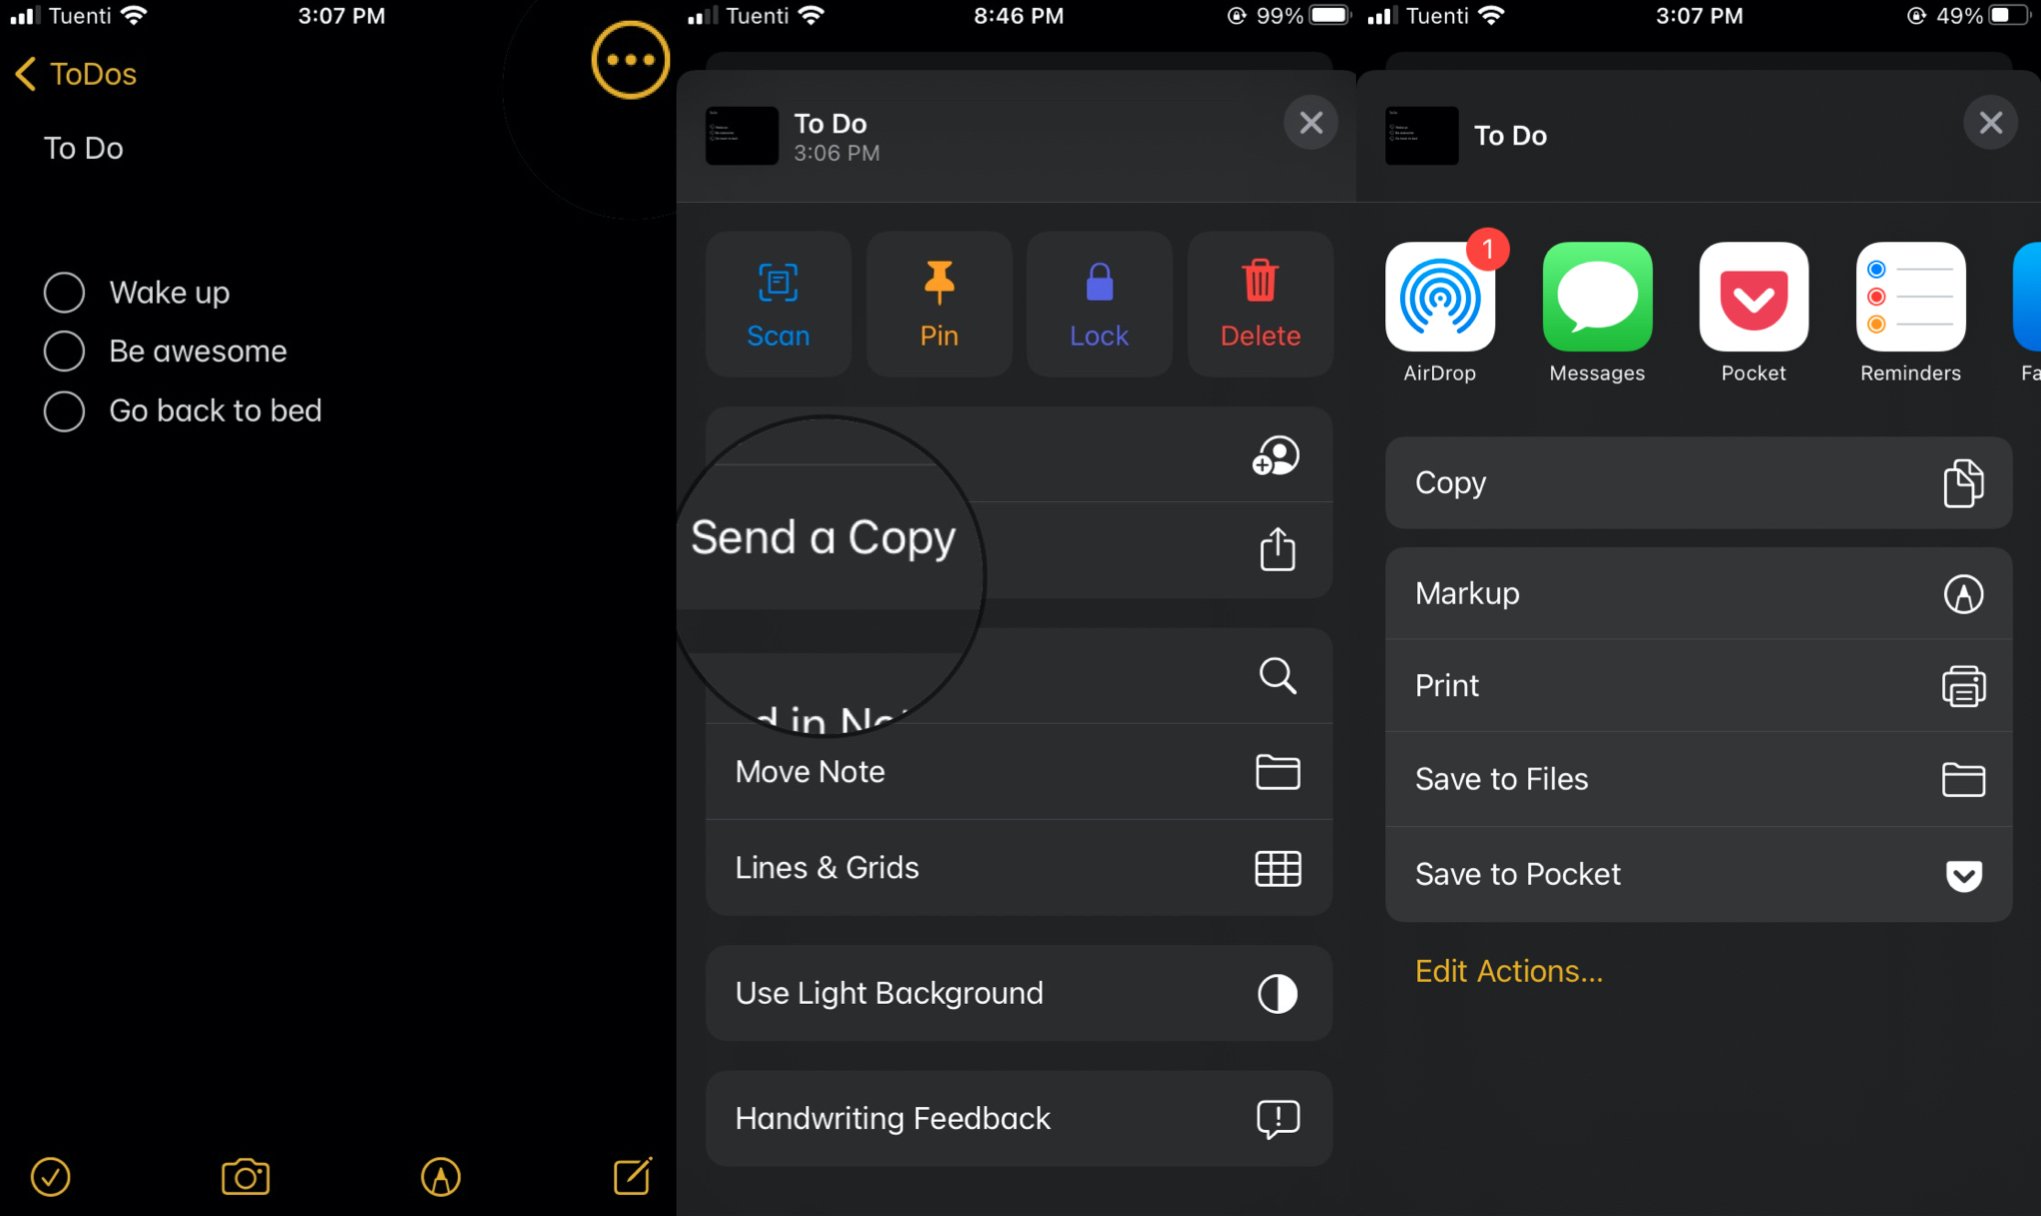 How To Send A Copy Of Your Notes on iPhone and iPad